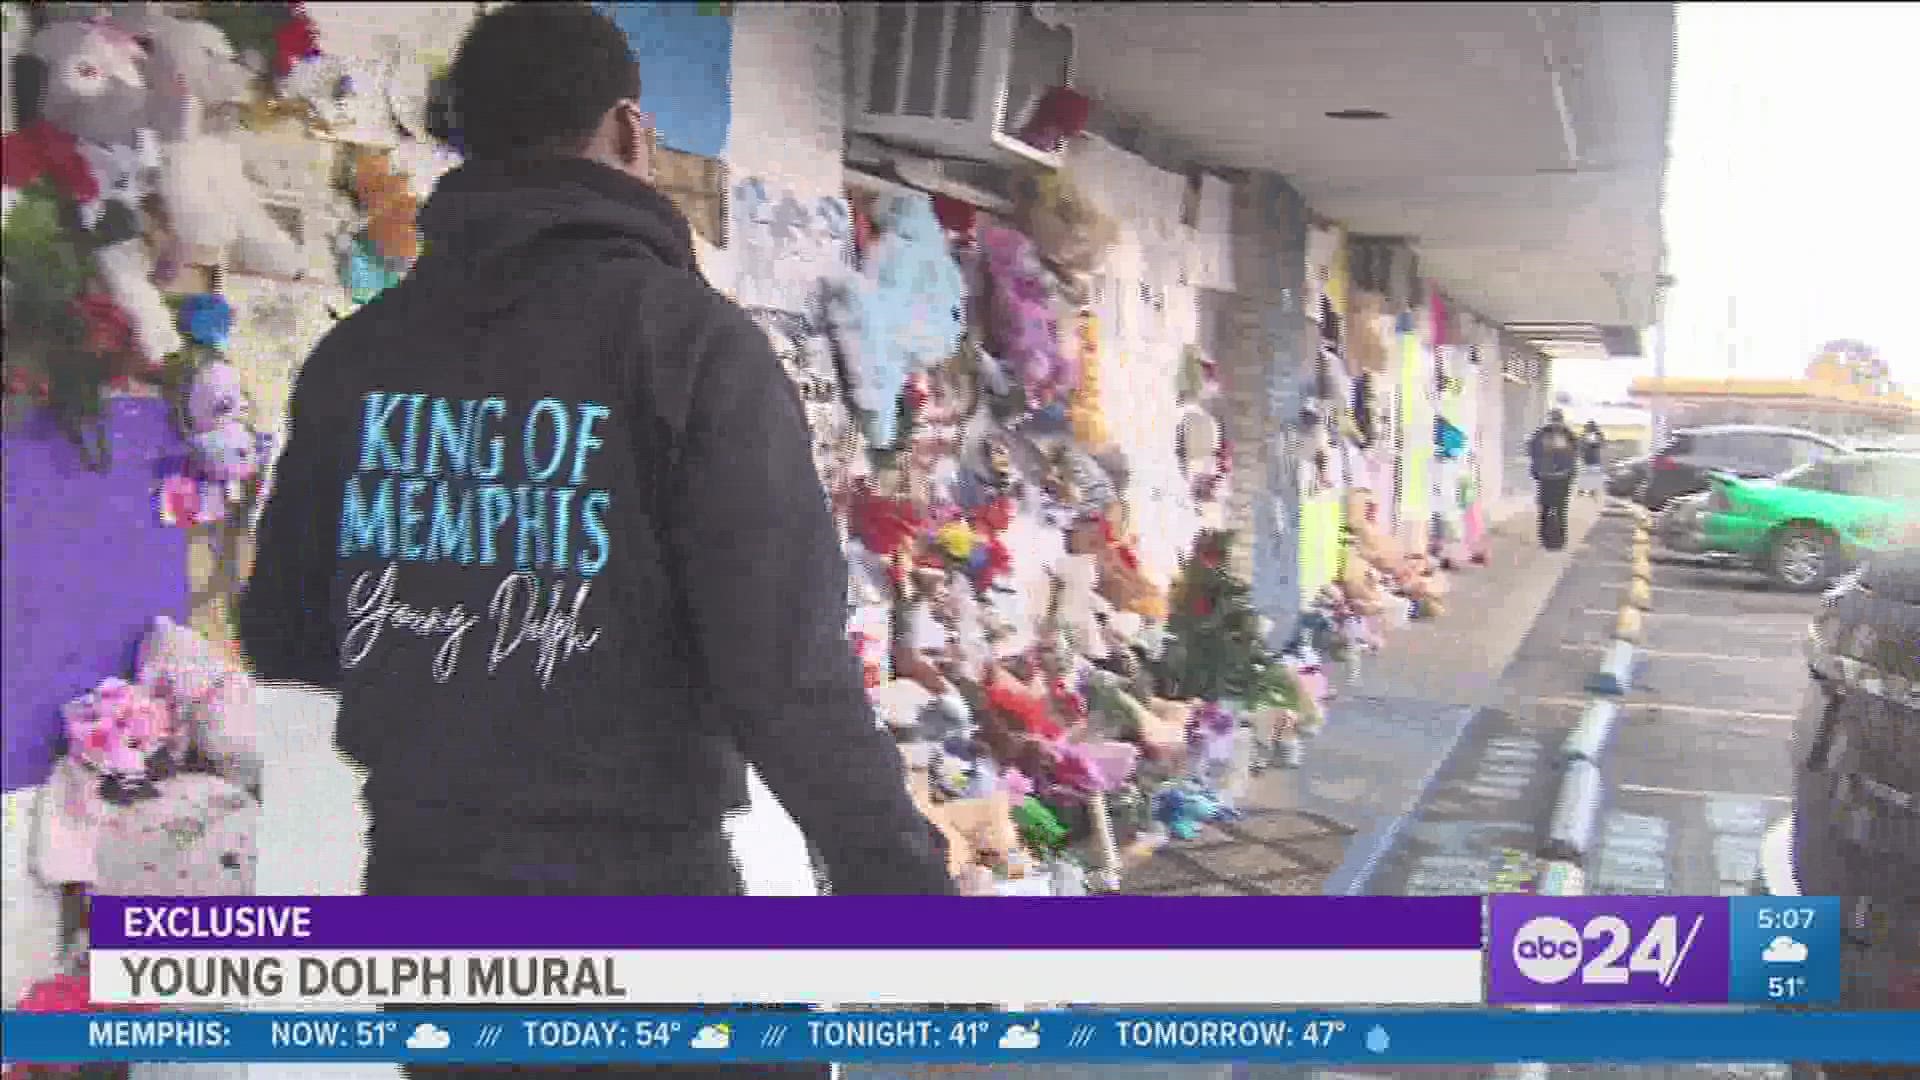 One Memphian is making it his daily duty to maintain and improve the growing memorial for the rapper outside the store he died at in November.